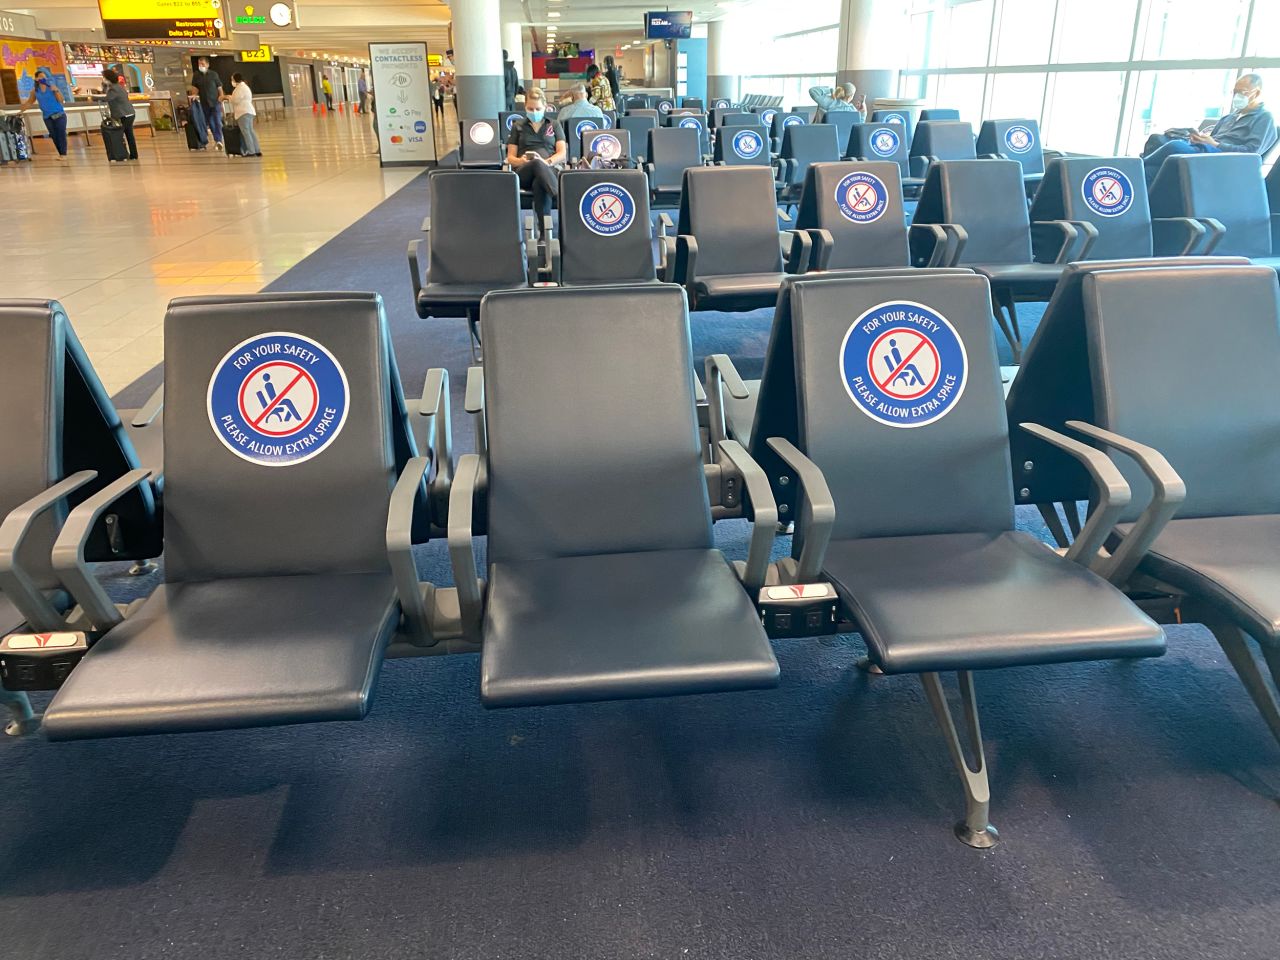 Seats outside the gates instruct travelers to abide by social distancing protocols.